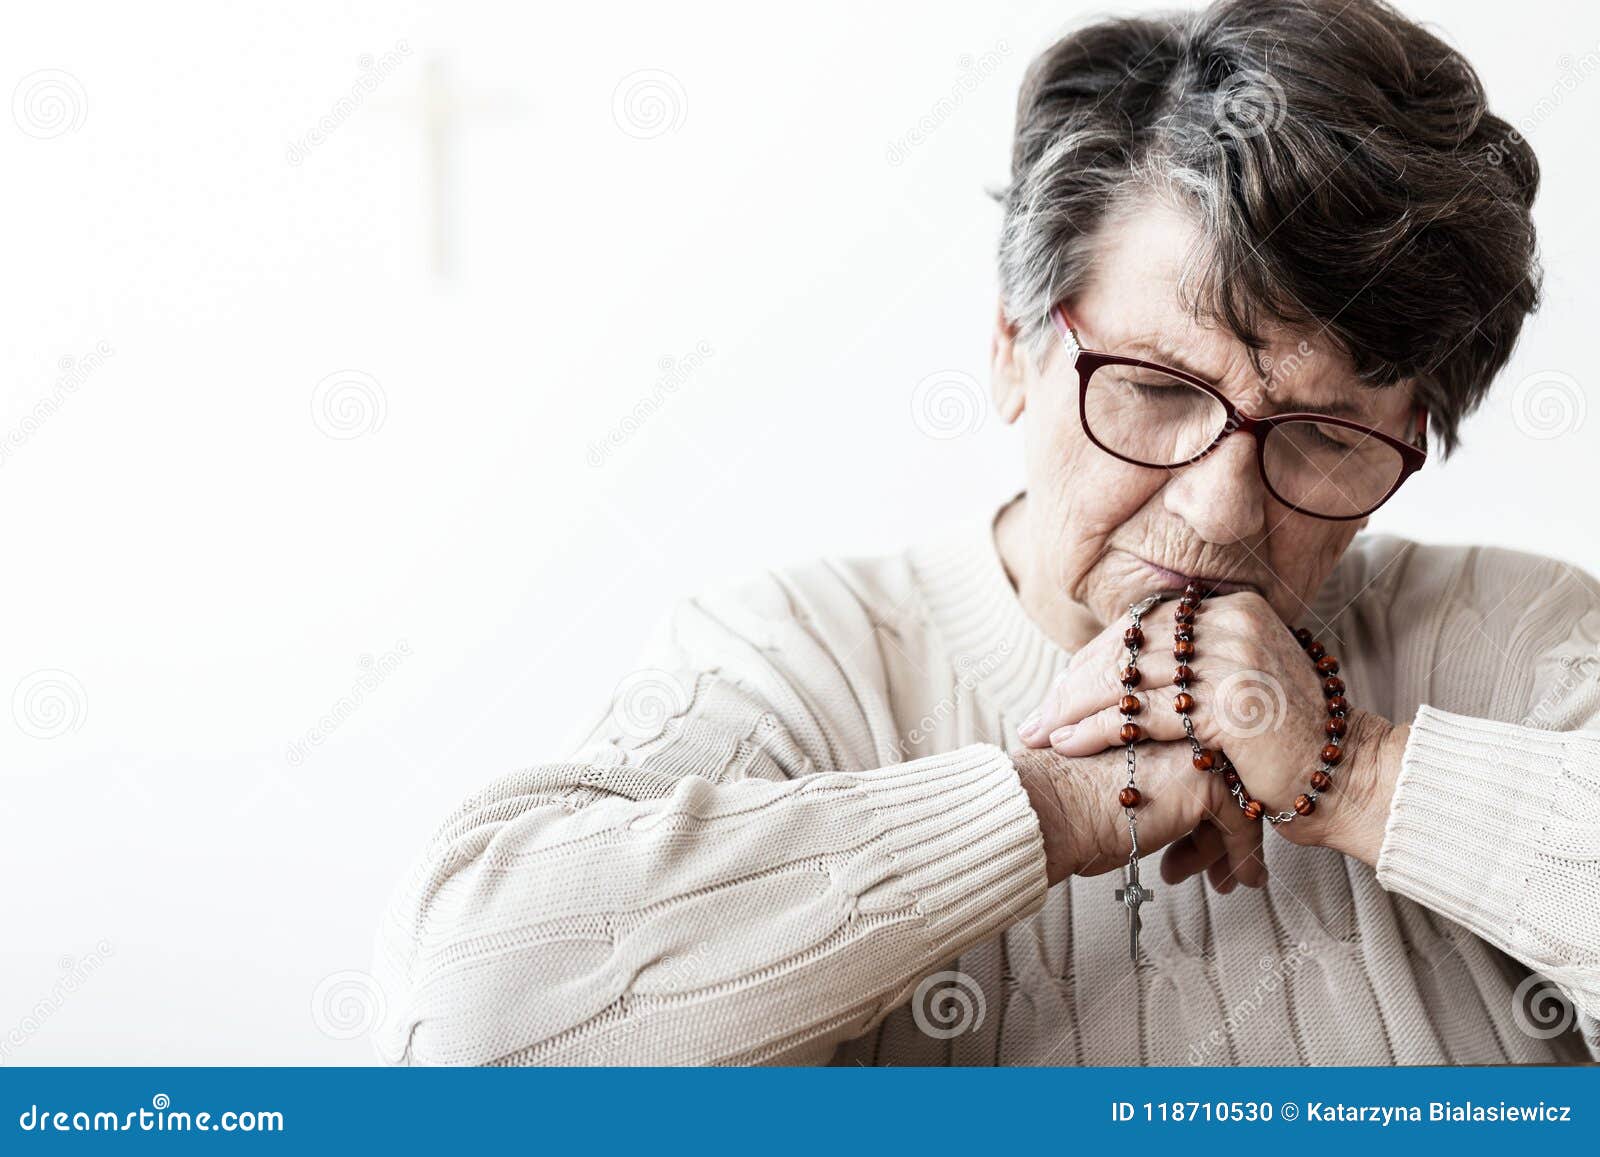 catholic grandmother in melancholy praying to god with red rosary with cross